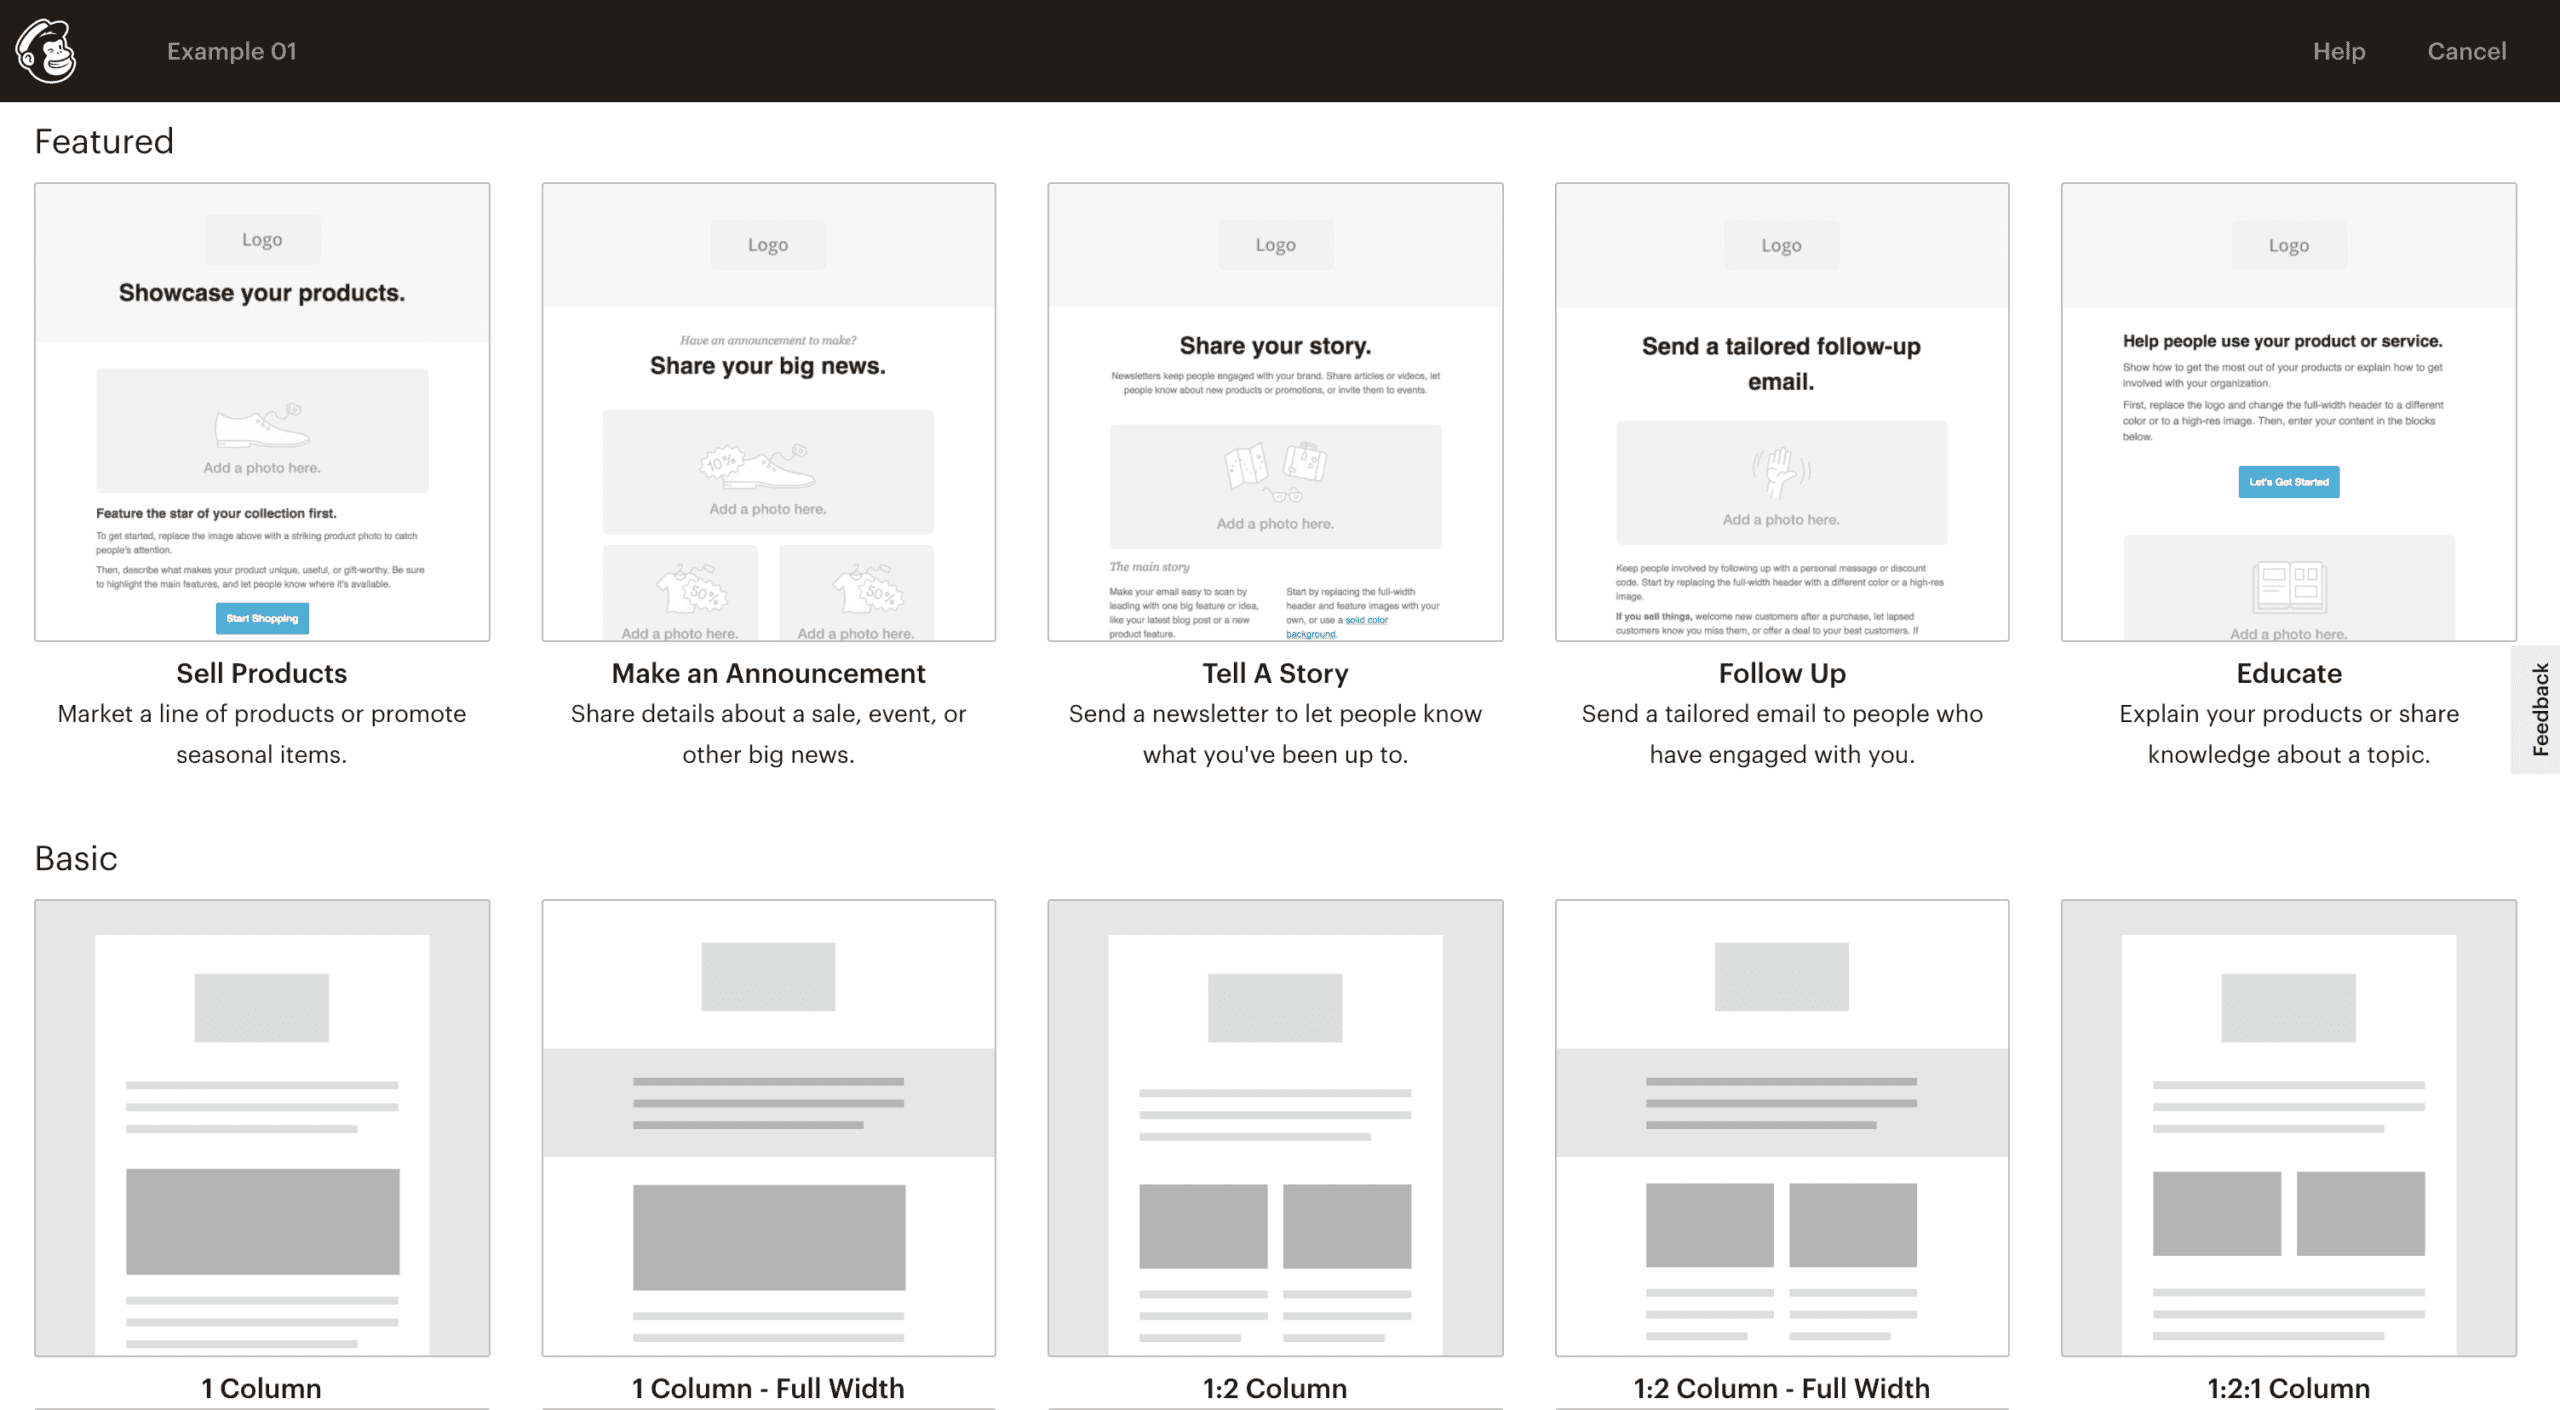 A screen shot of a web page showcasing various types of pages, highlighting exceptional web design and enhancing both User Experience (UX) and User Interface (UI).